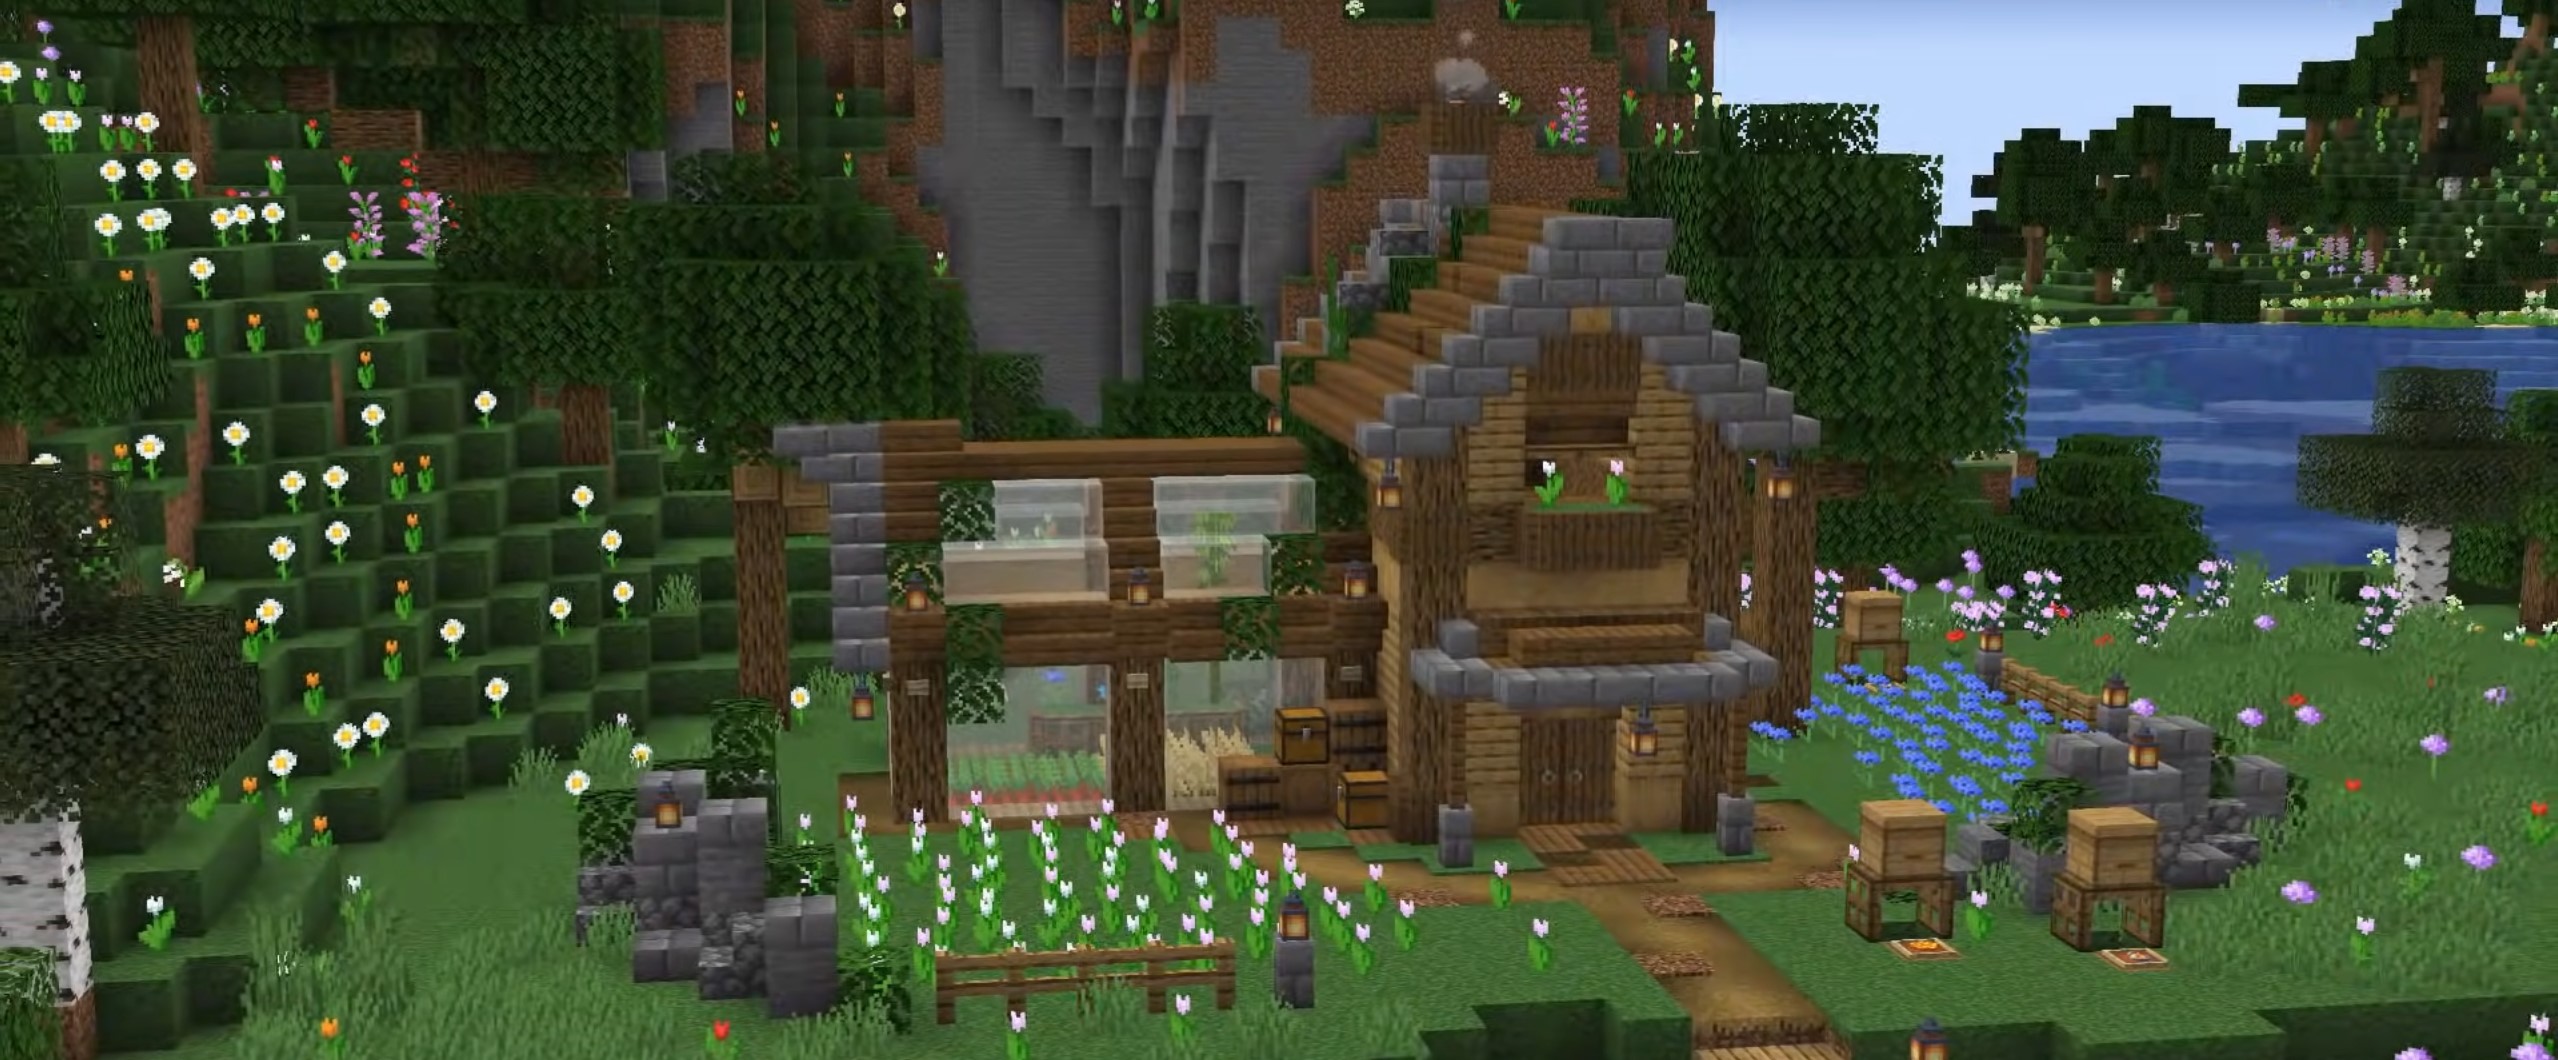 Starter House with Greenhouse minecraft building idea